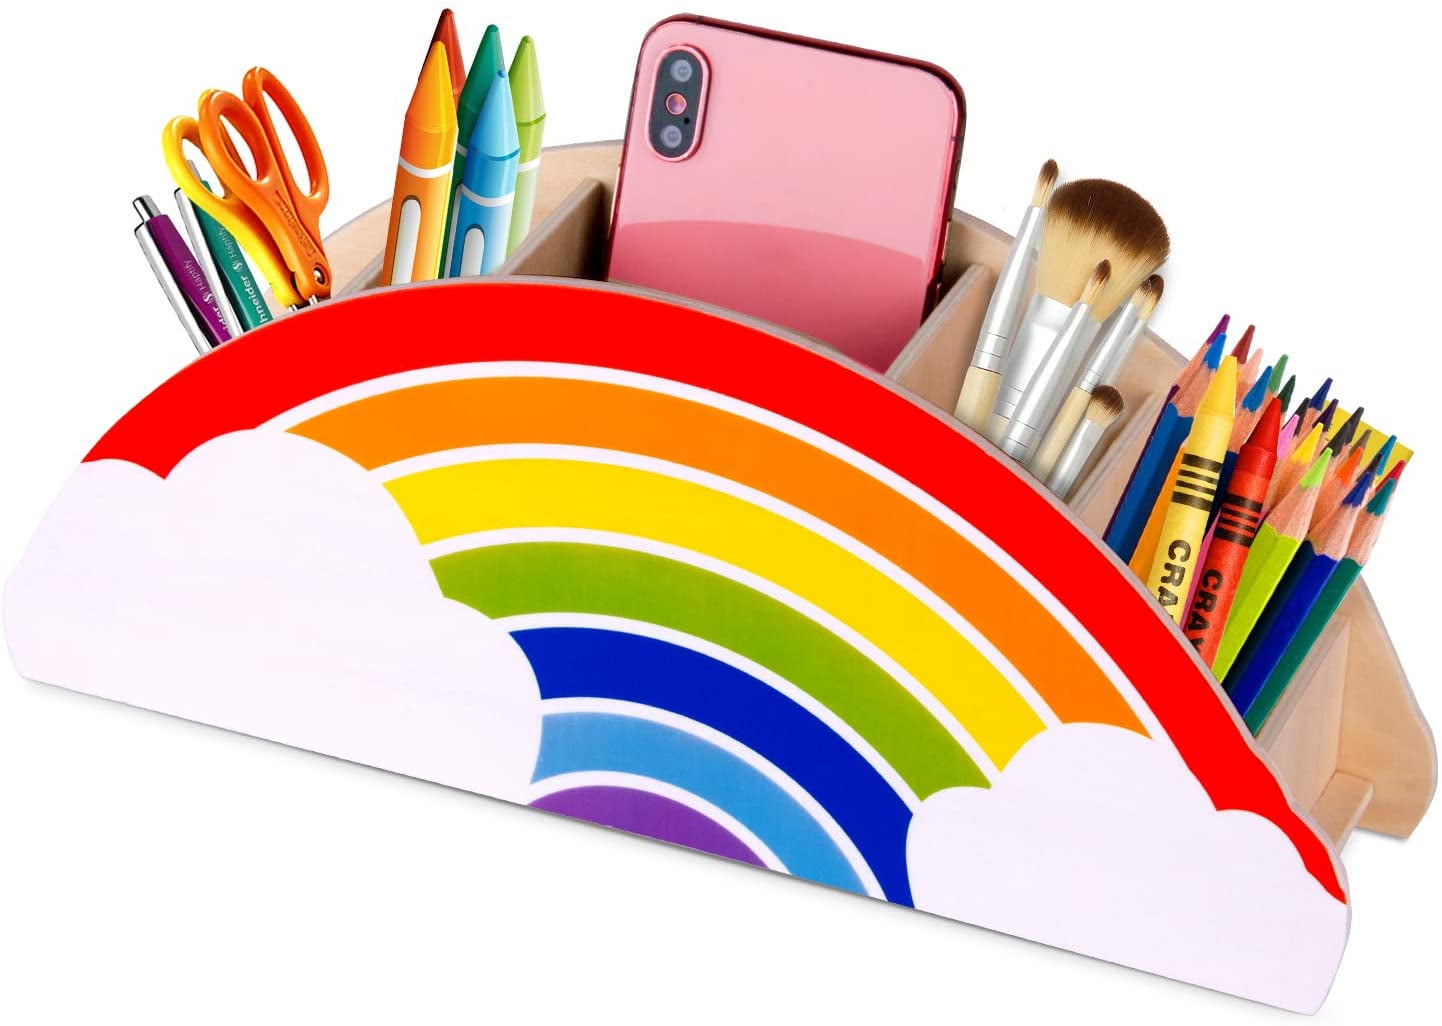 Desk Pen Holder Caddy Organizer for Home School Supplies Office Accessories Cute Rainbow Decor Art Pencil Holder for Kids Girl Silicone Pencil Holder 